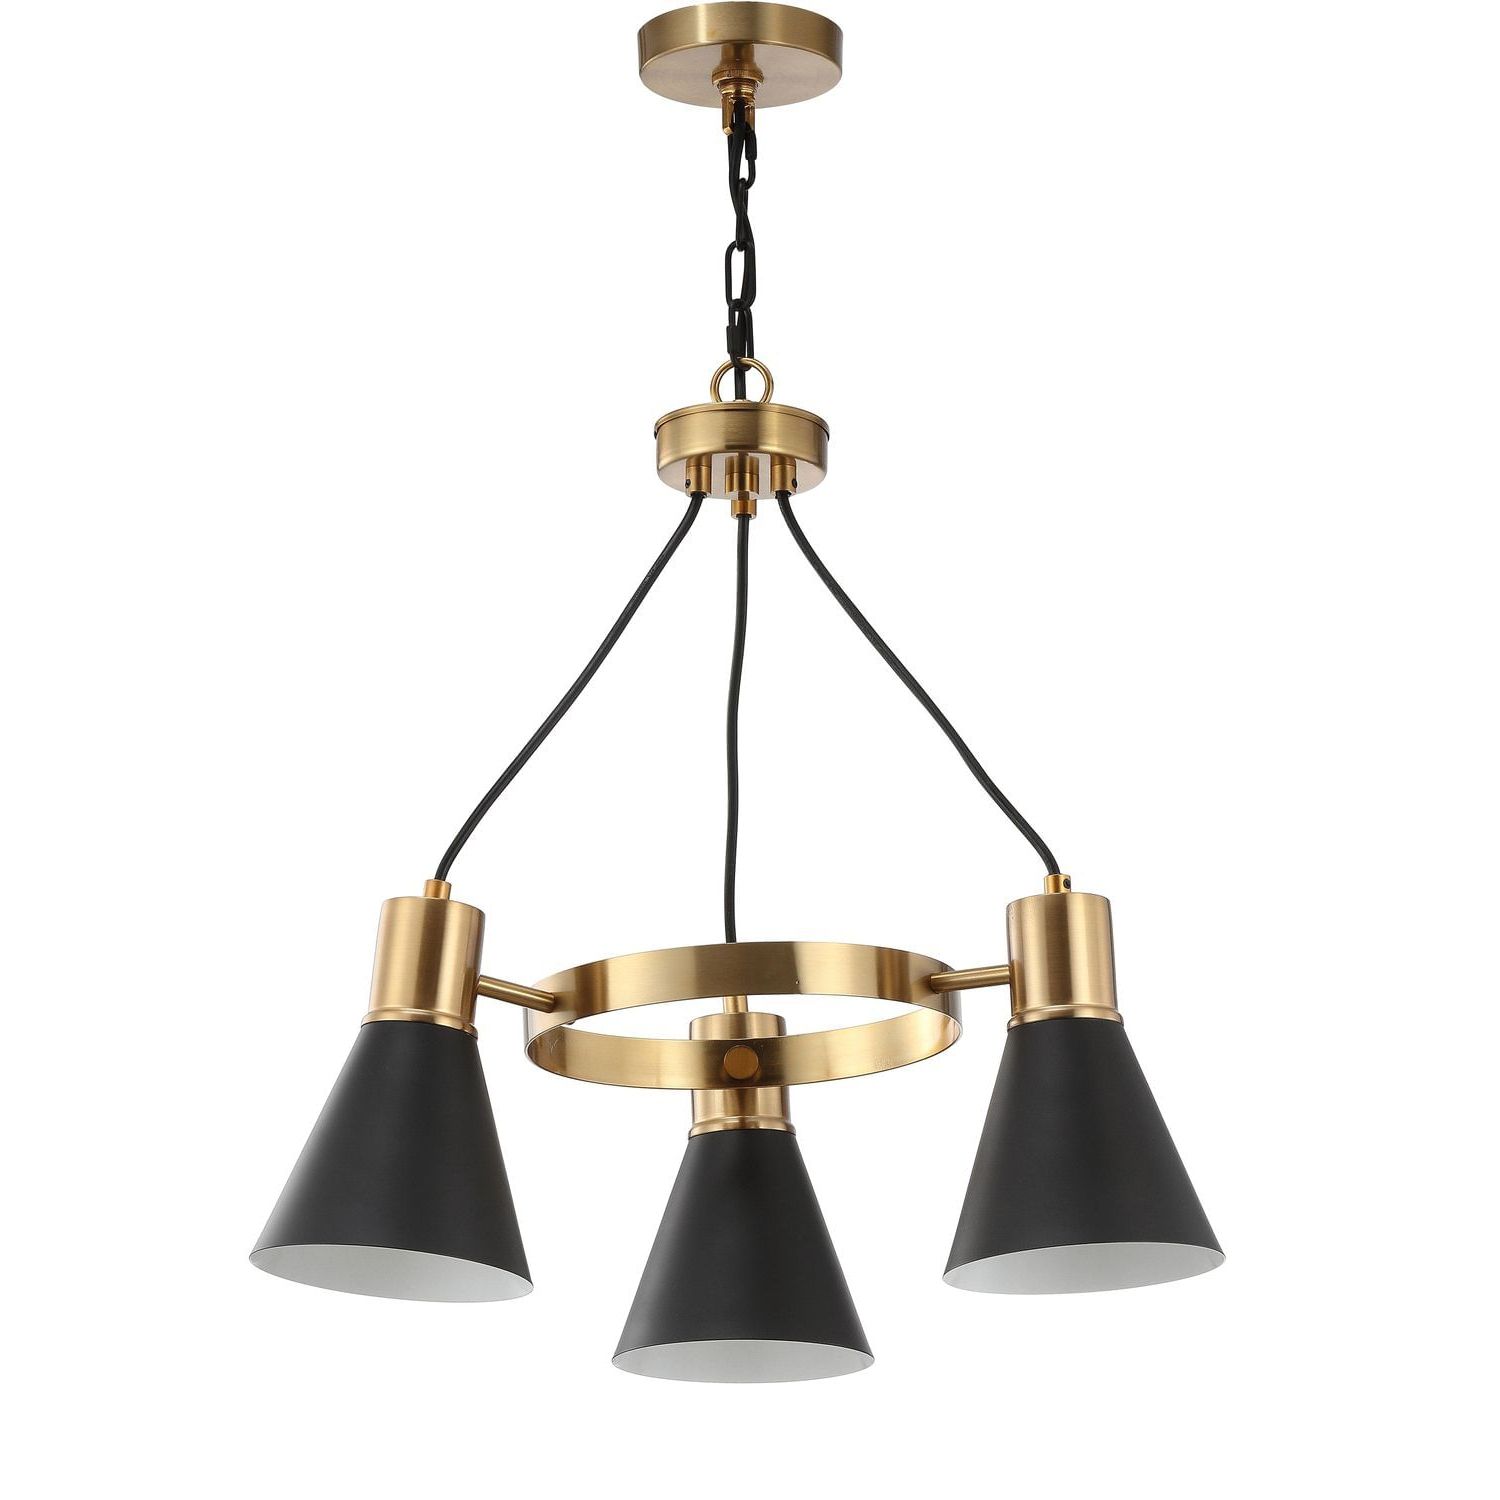 Brass And Black Led Island Pendant For Well Known Apollo 22" 3 Light Adjustable Modern Metal Led Task (View 7 of 20)